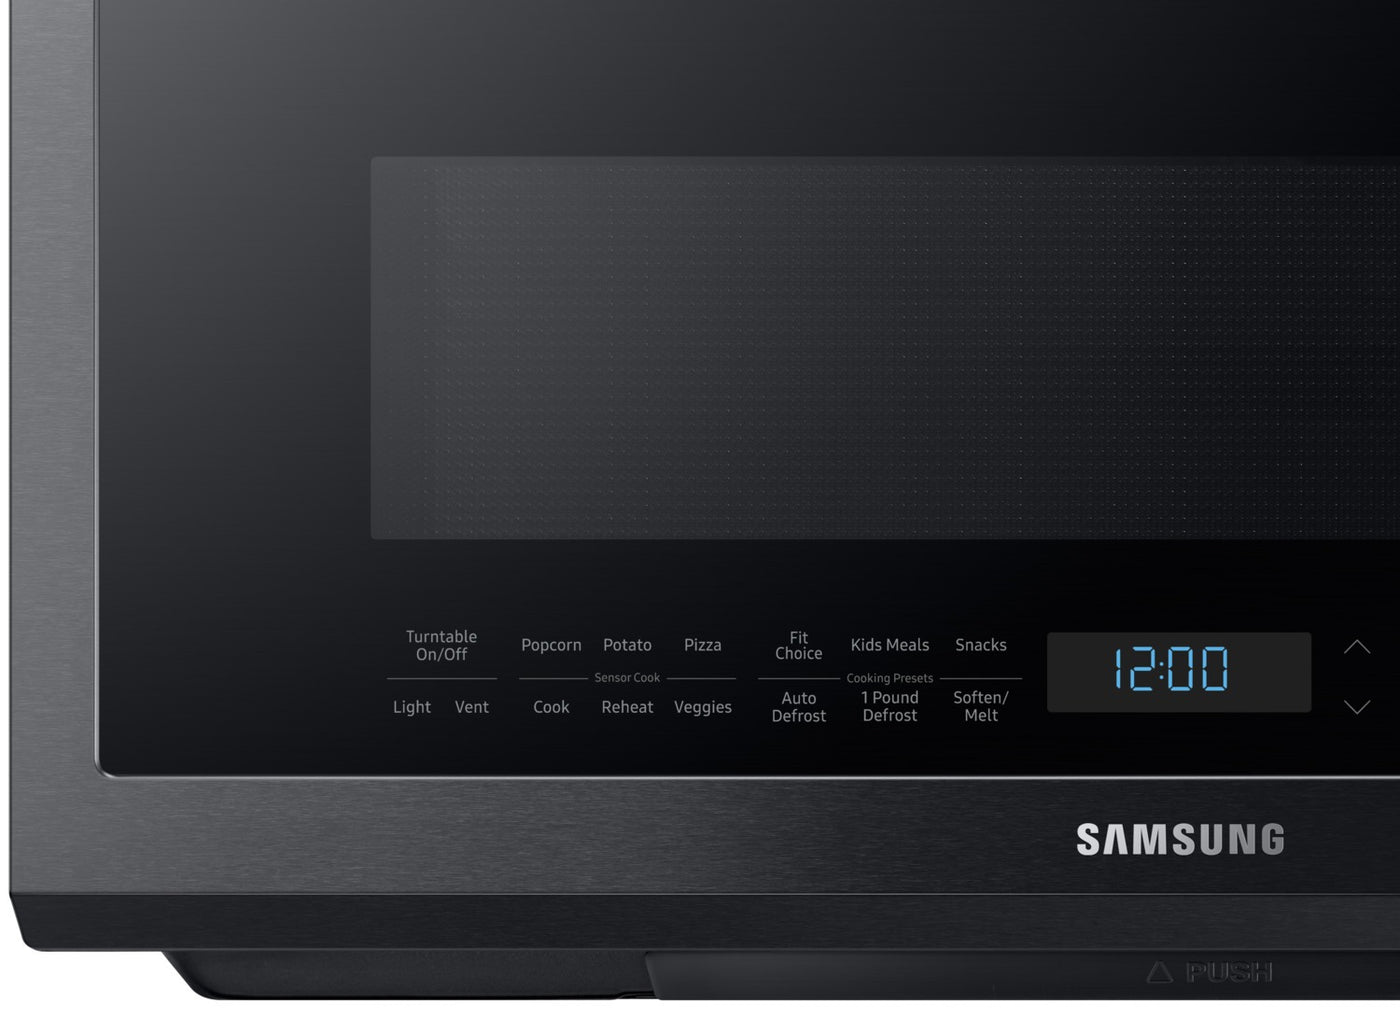 Samsung Black Stainless Steel Over-the-Range Microwave (2.1 Cu. Ft.) - ME21M706BAG/AC